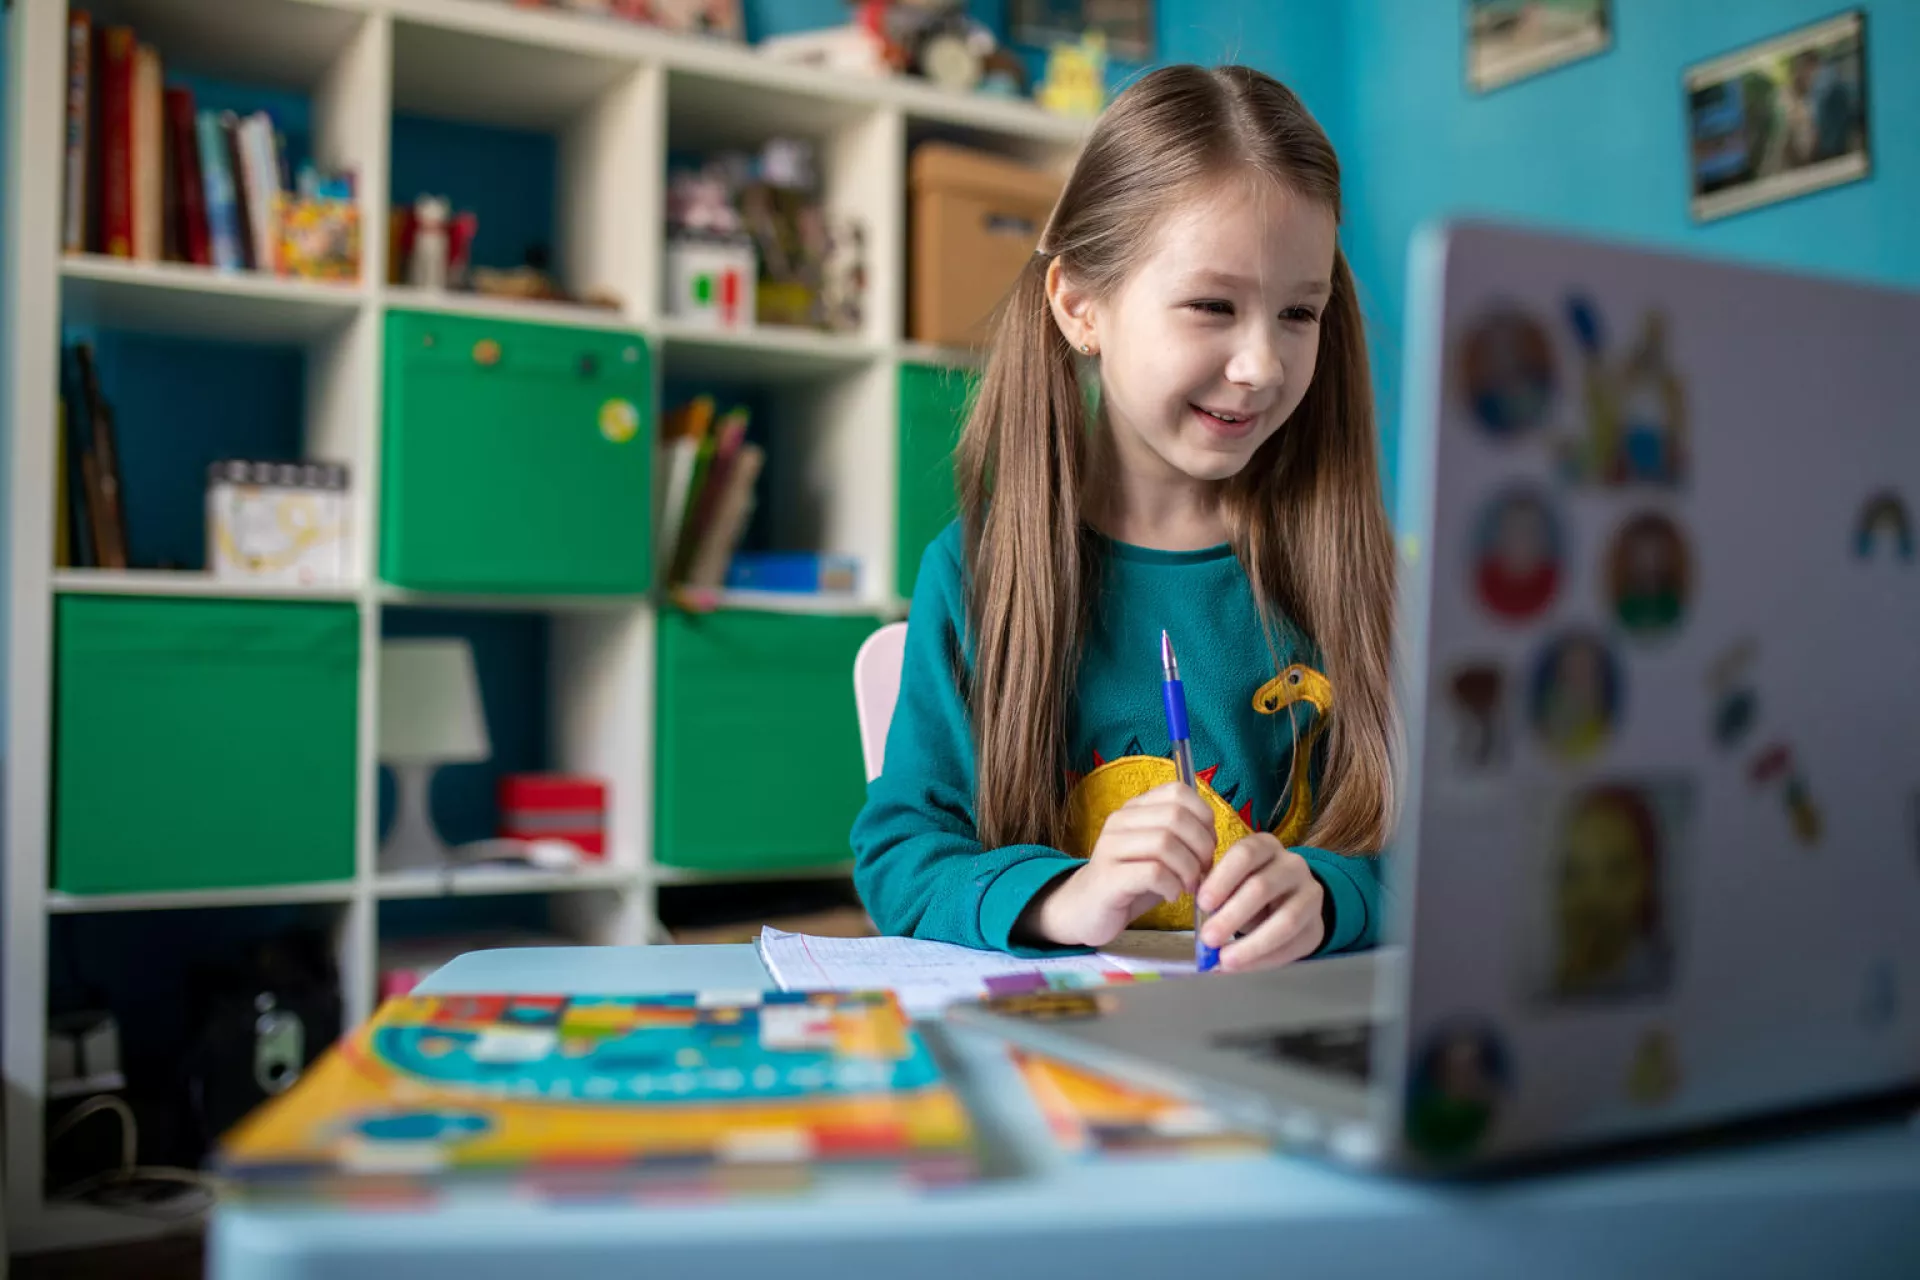 On 15 April 2020 in Kyiv, Ukraine, Zlata, 7, works on schoolwork from home, with all schools in the country closed as part of measures to combat the spread of COVID-19.